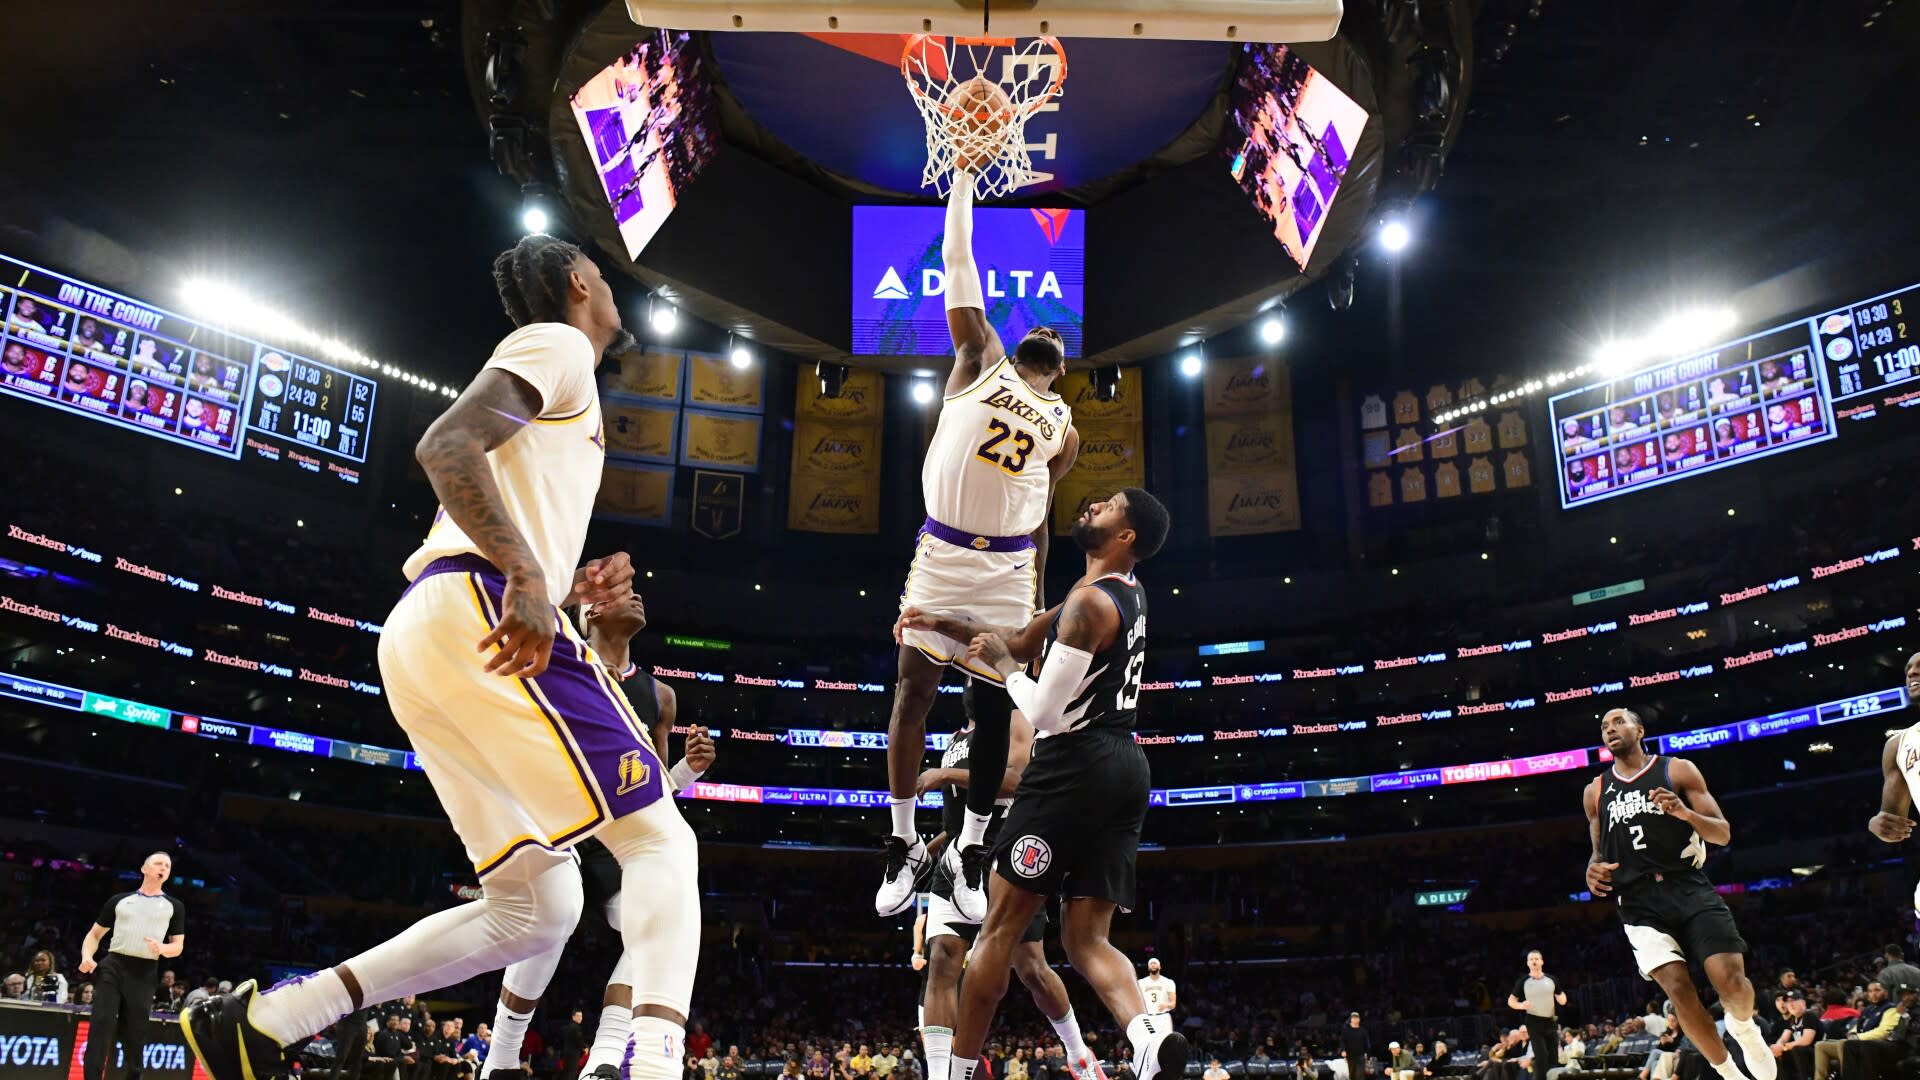 Watch LeBron's poster dunk, he scores 25 as Lakers beat Clippers, ending 4-game losing streak